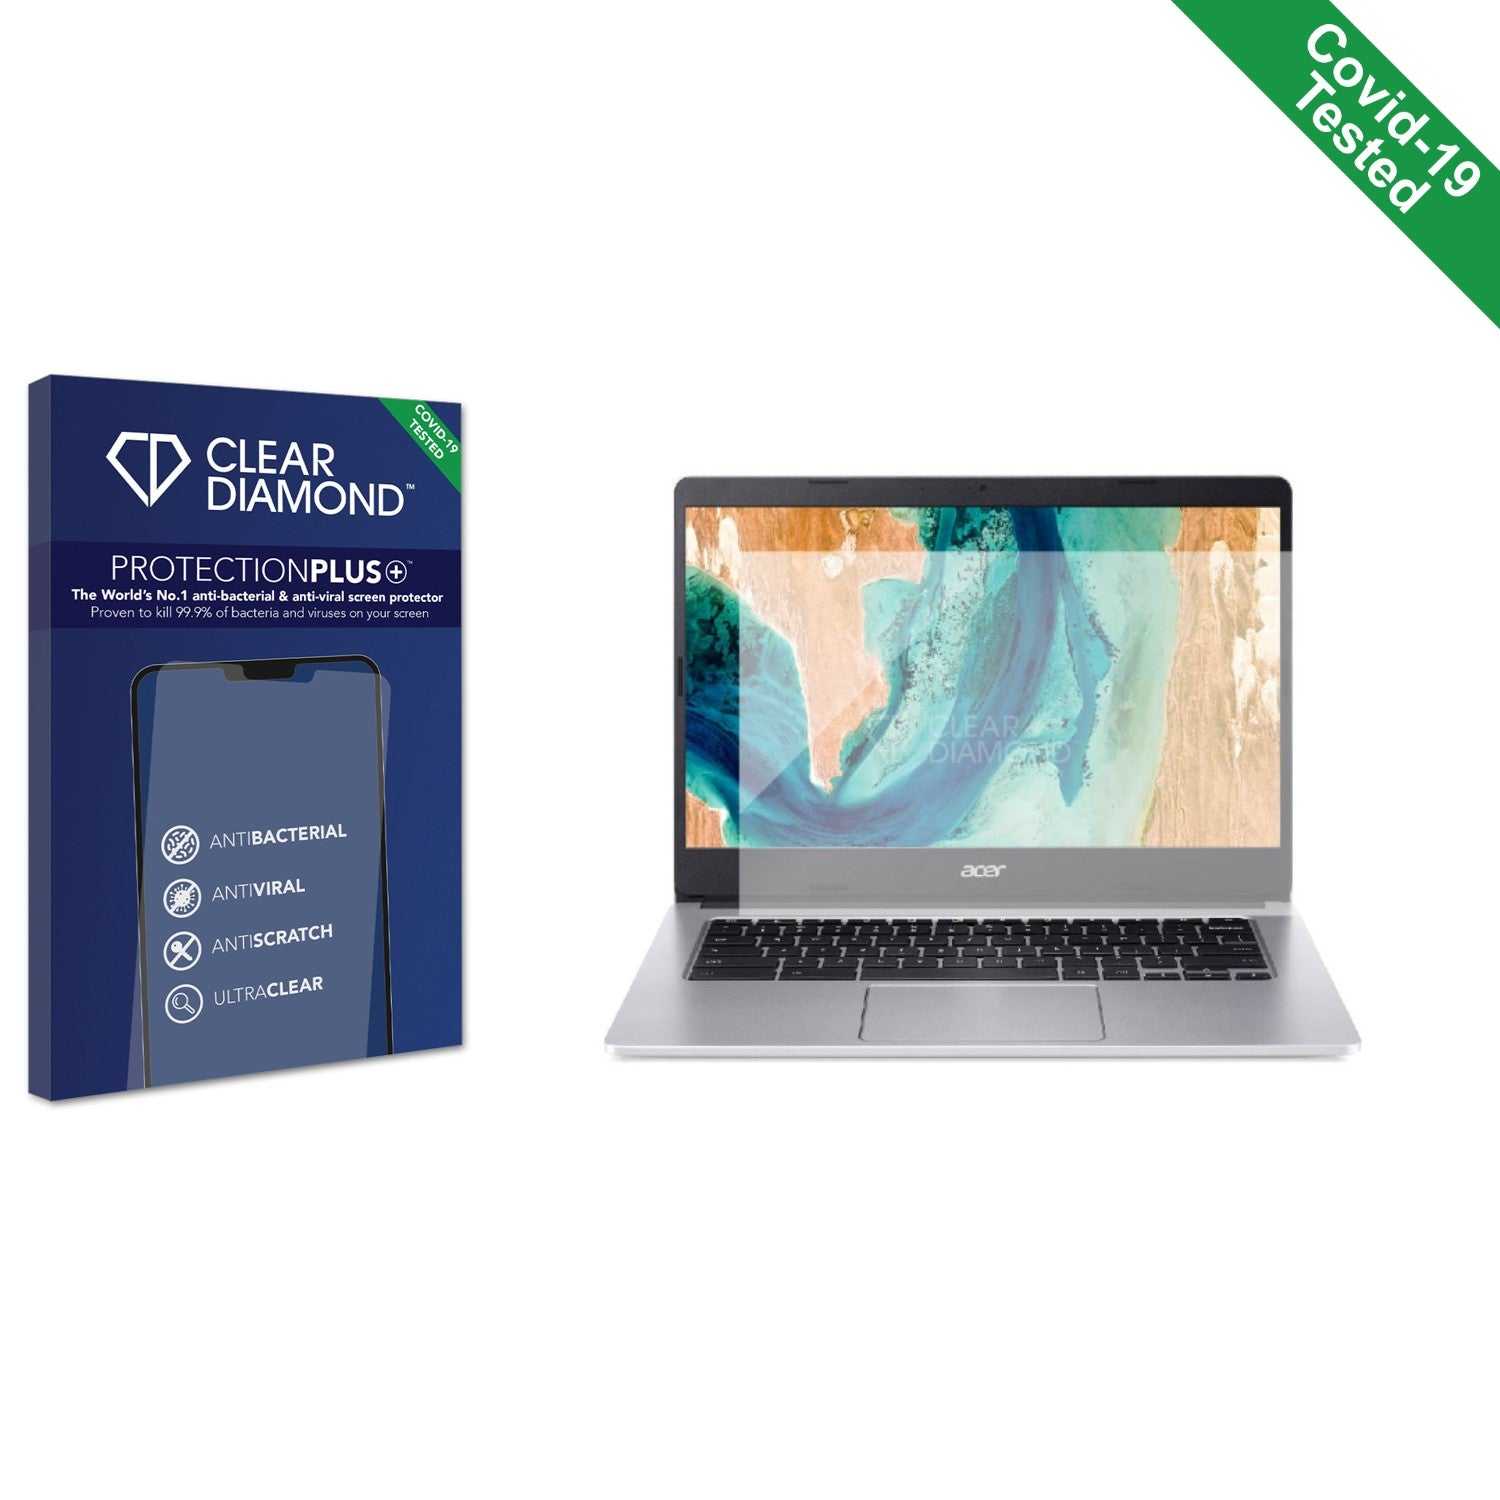 ScreenShield, Clear Diamond Anti-viral Screen Protector for Acer Chromebook Spin 314 CB314-2HT